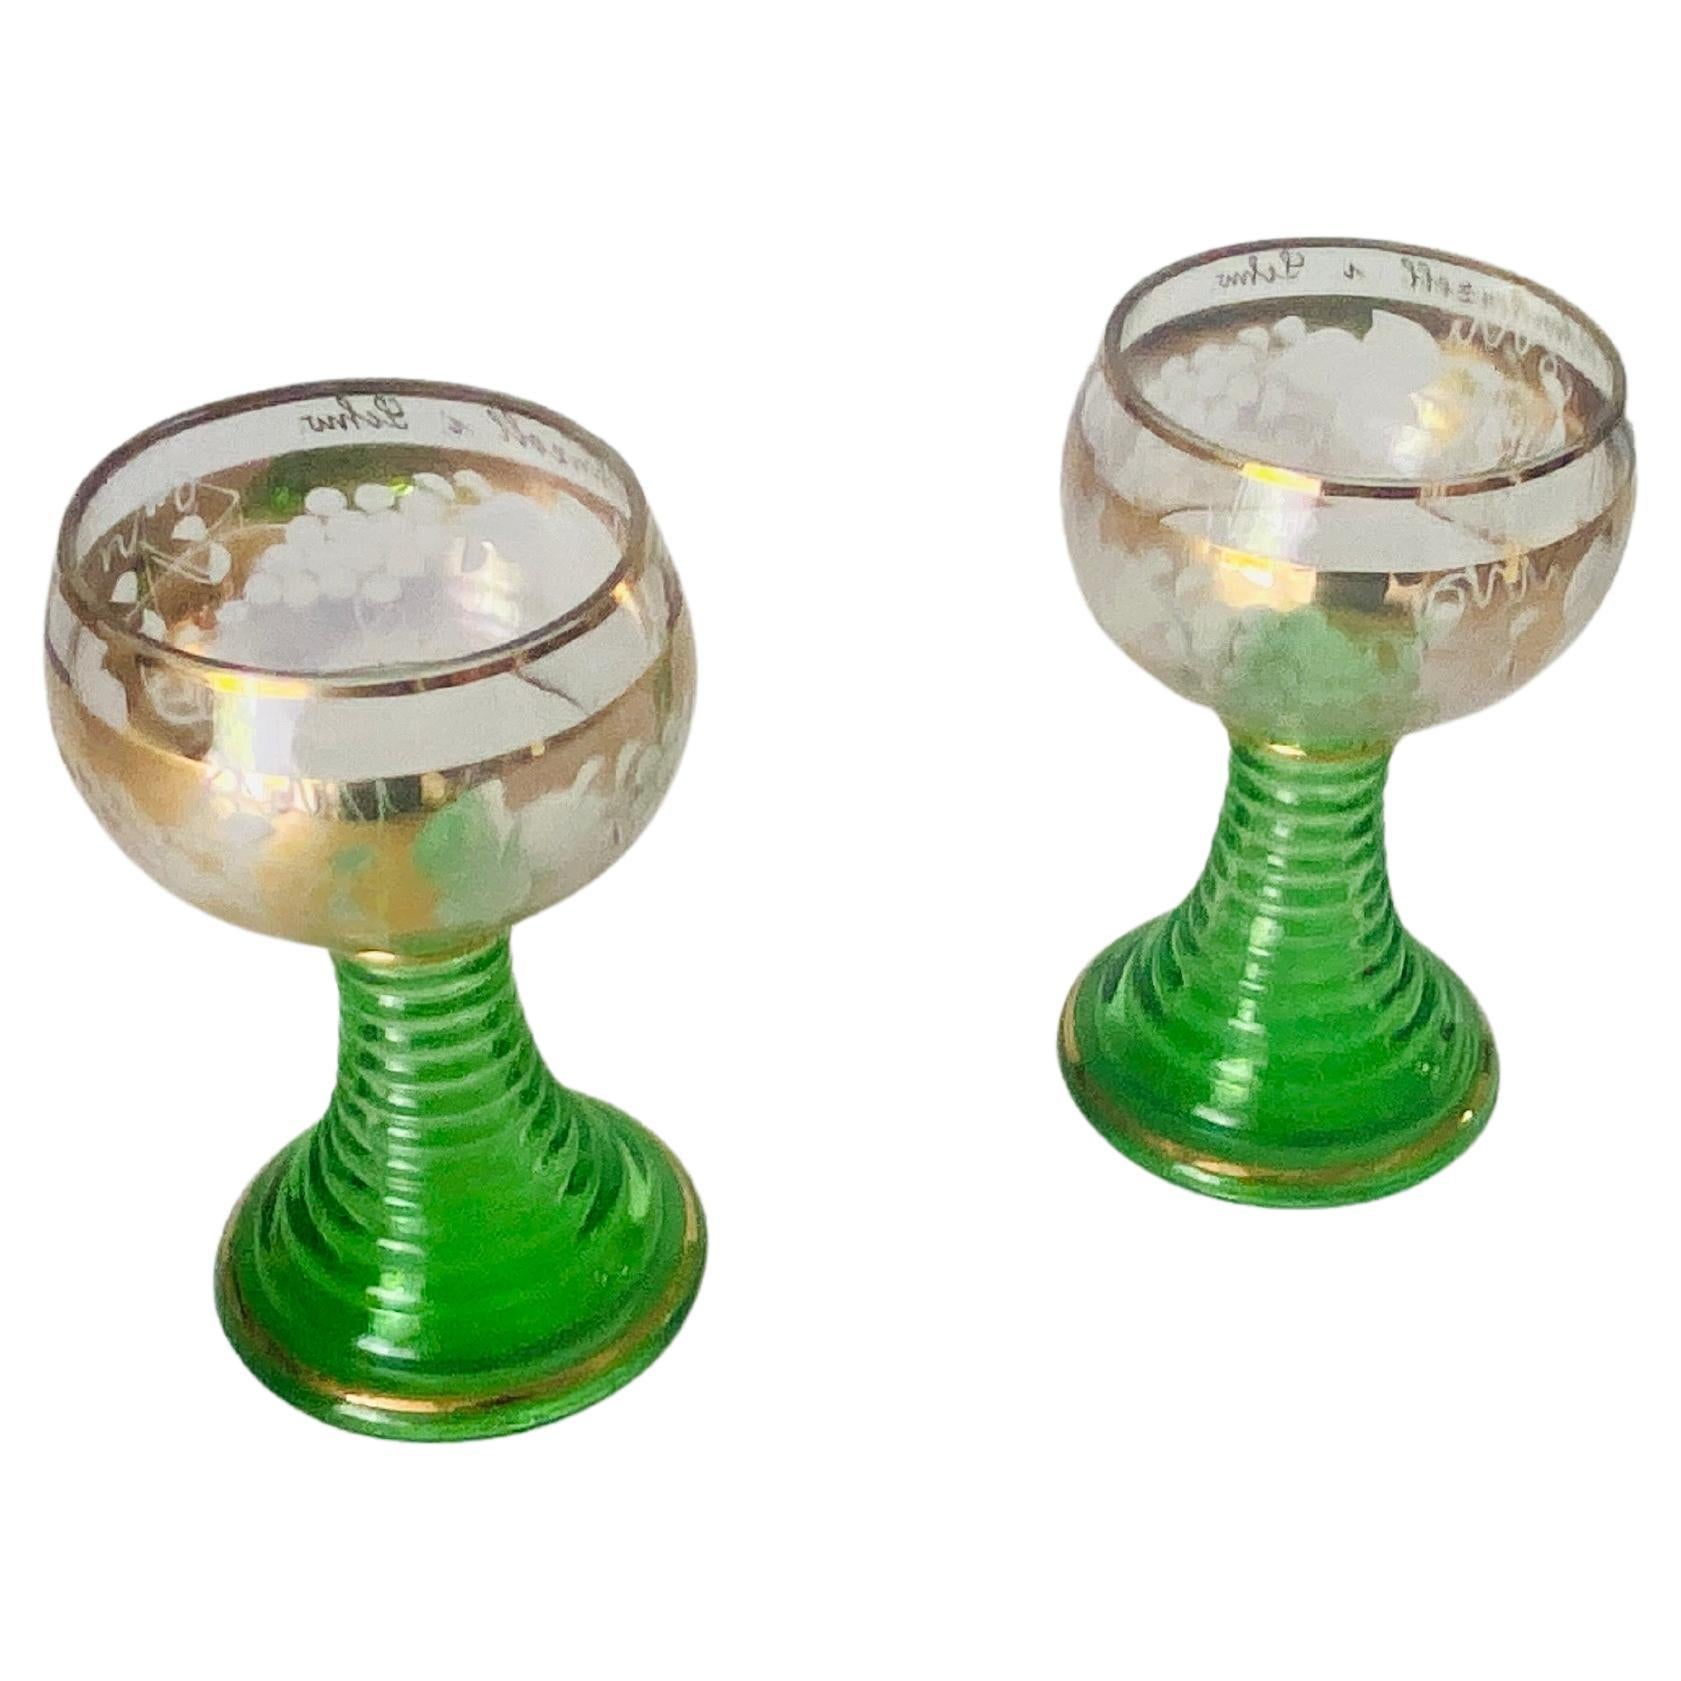 Pair of Wine Glass, in Green and Gilt color. The Glass is carved with decorations.
Good condtion.